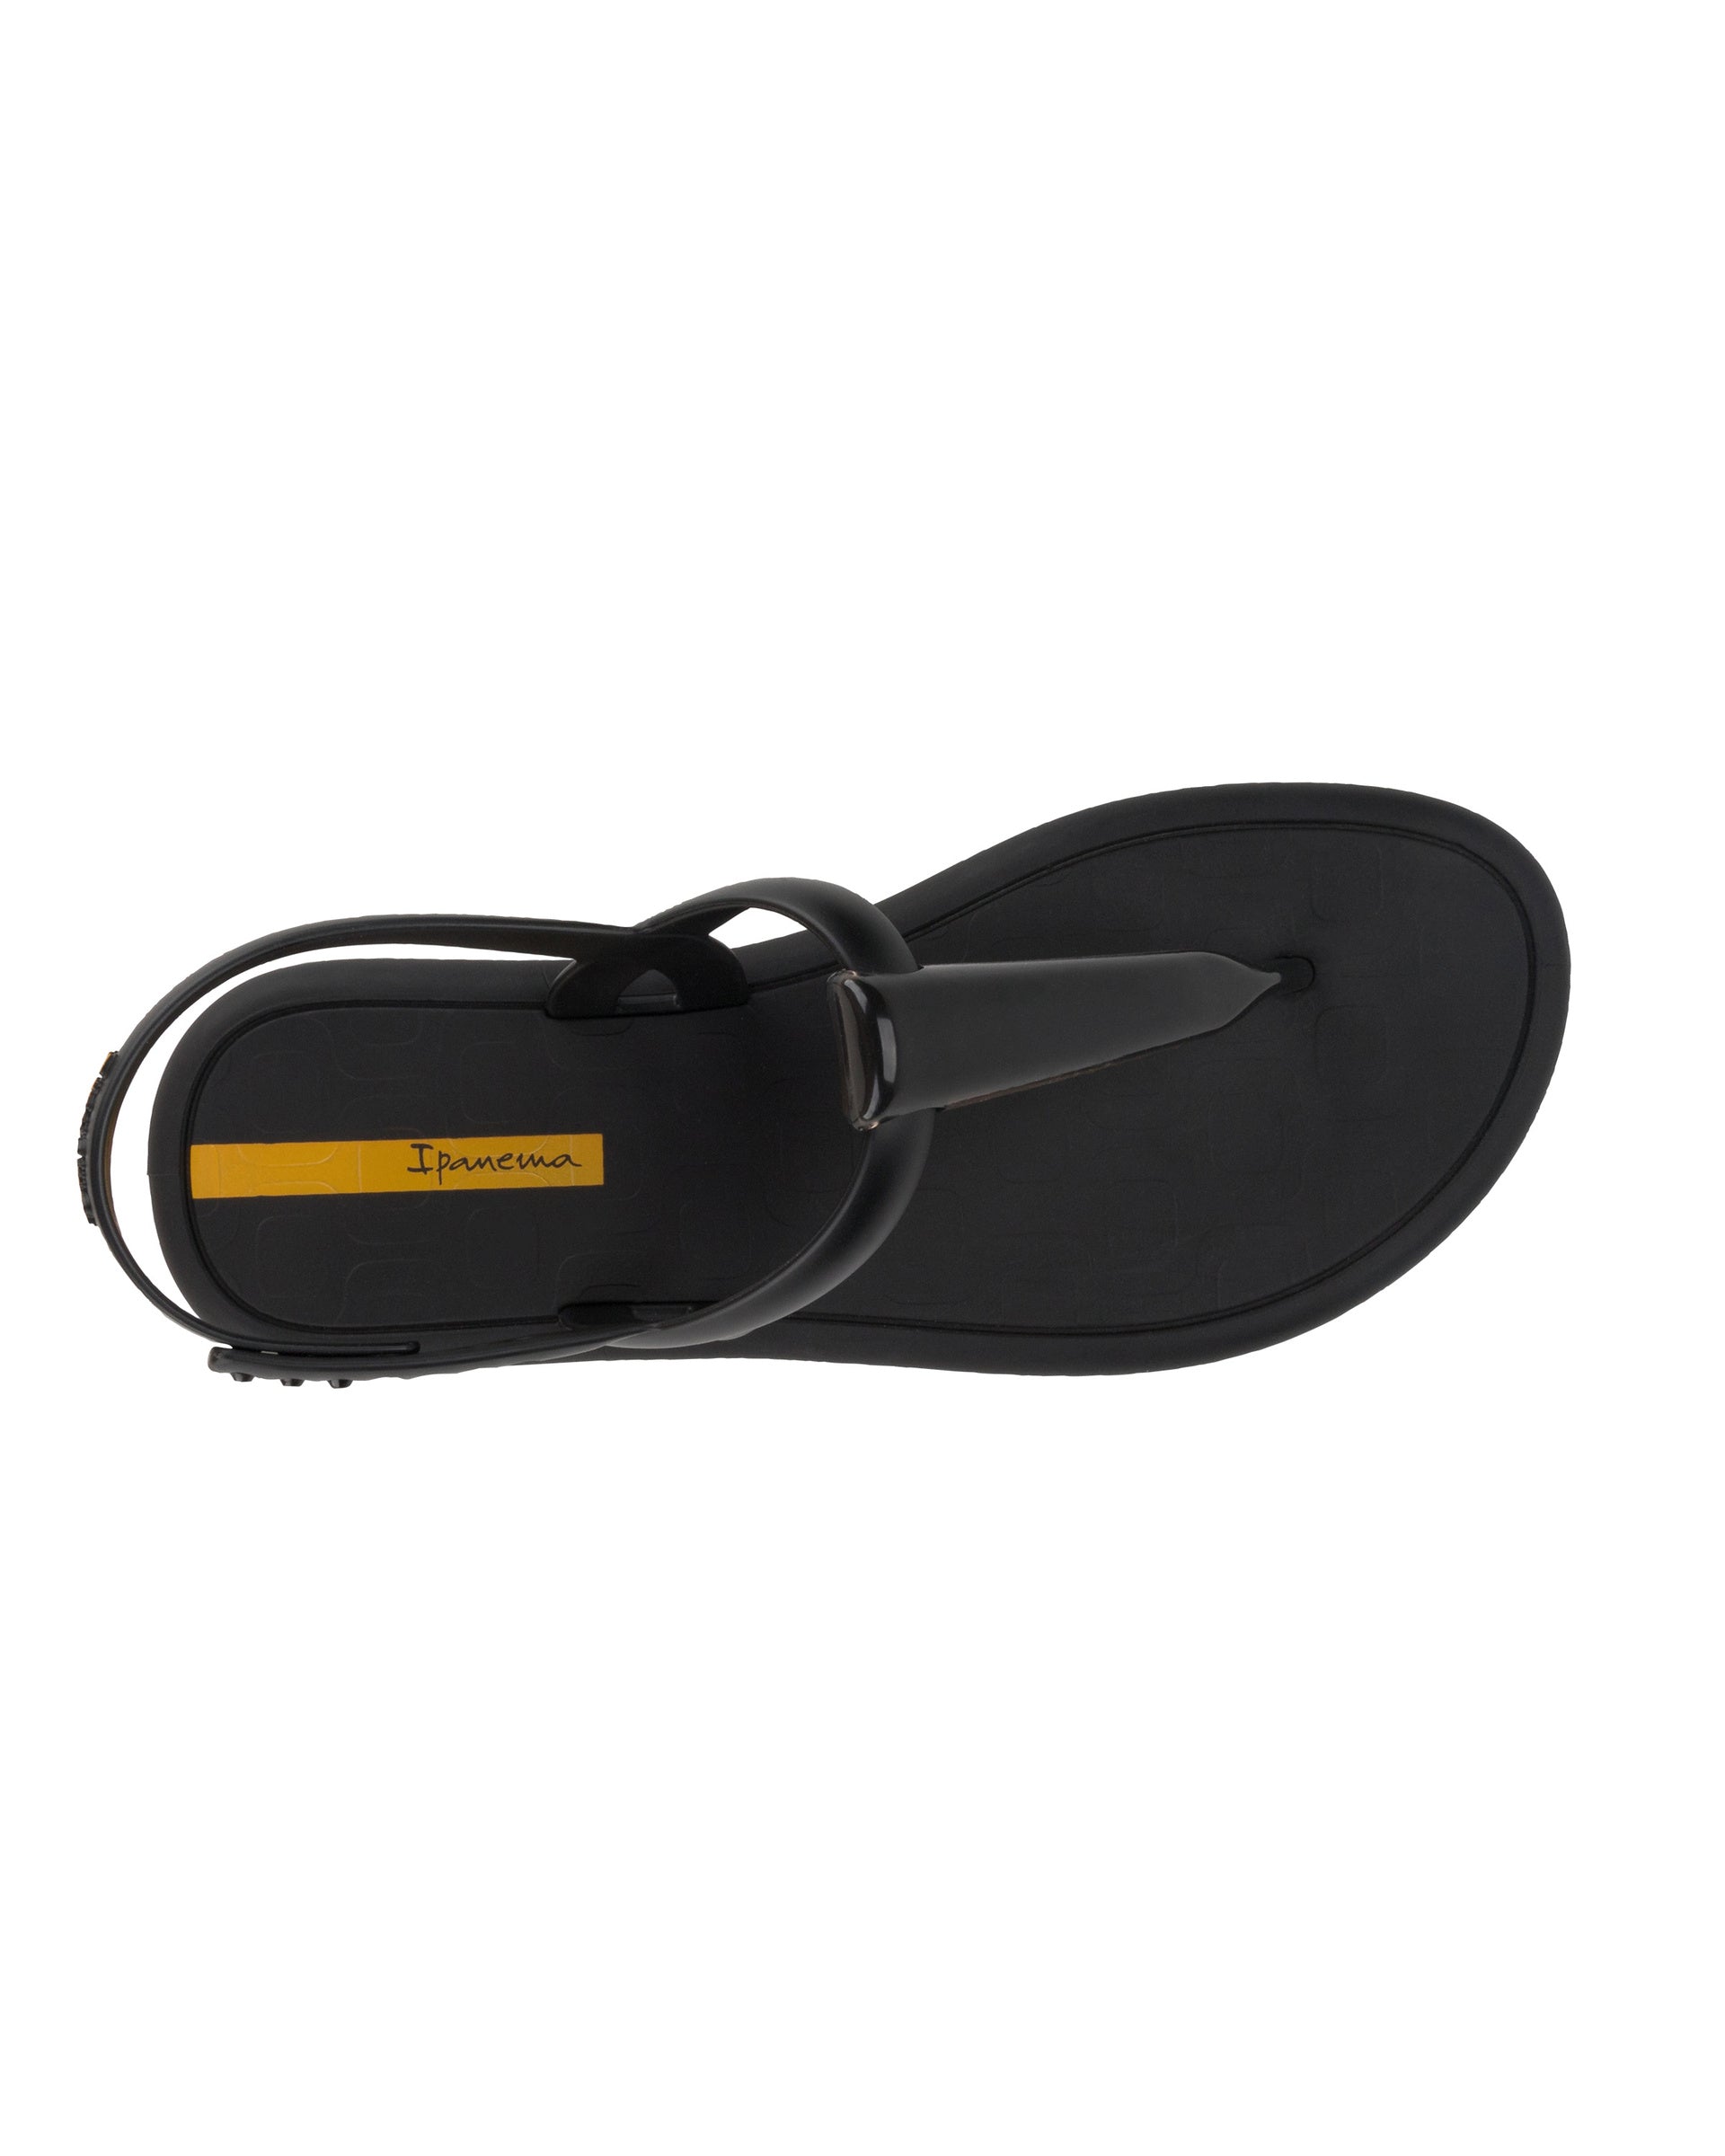 Top view of a black Ipanema Glossy women's t-strap sandal.